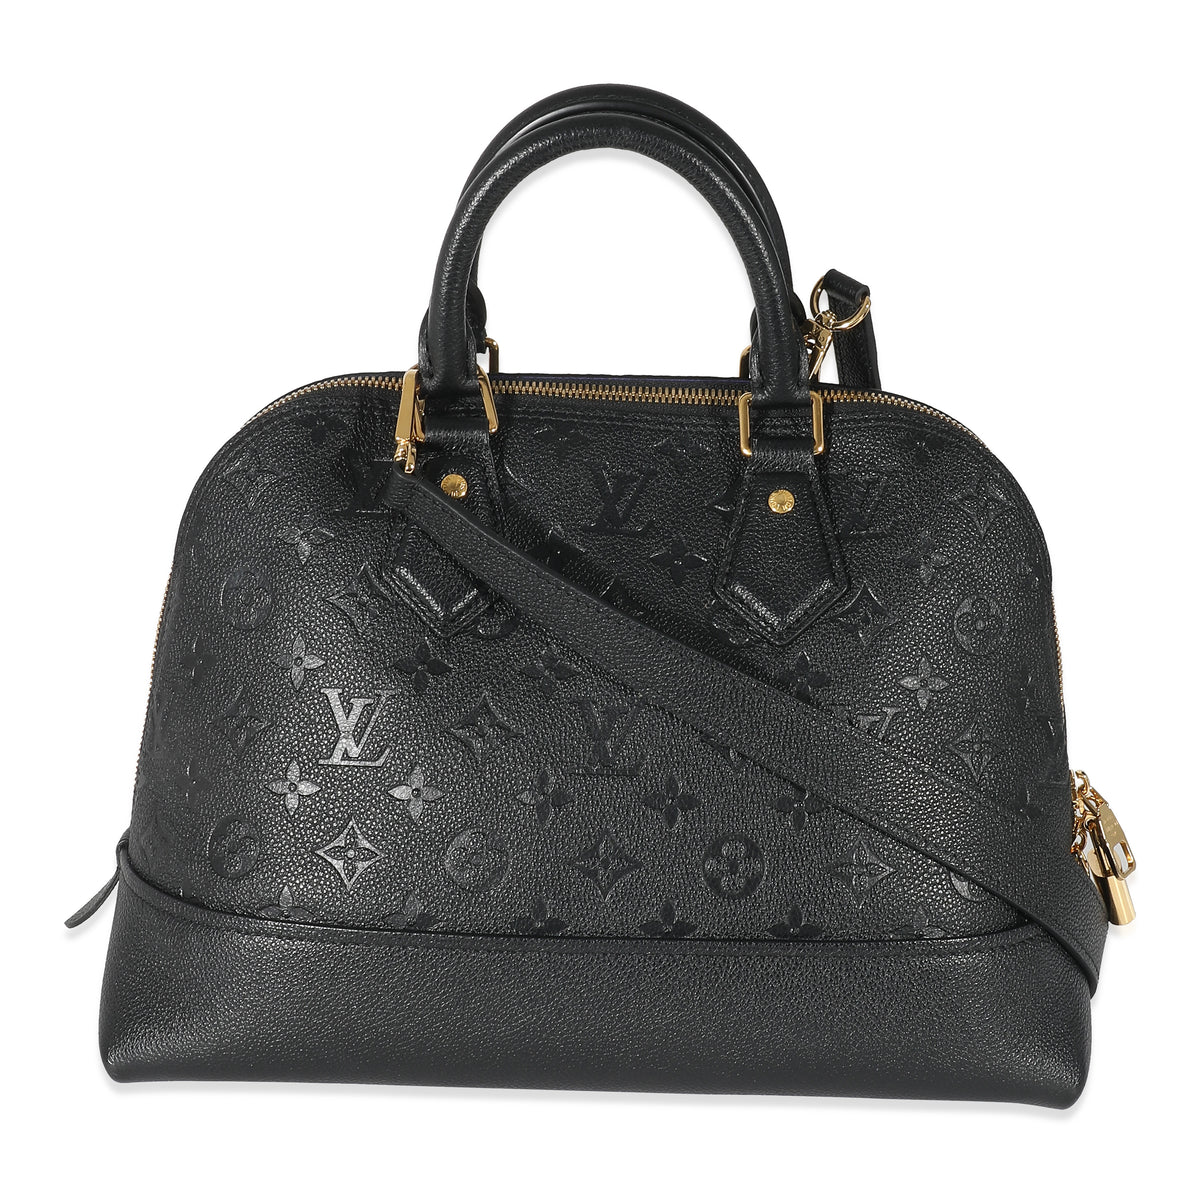 SOLD LV Black Monogram Neo Alma BB in like new condition with box